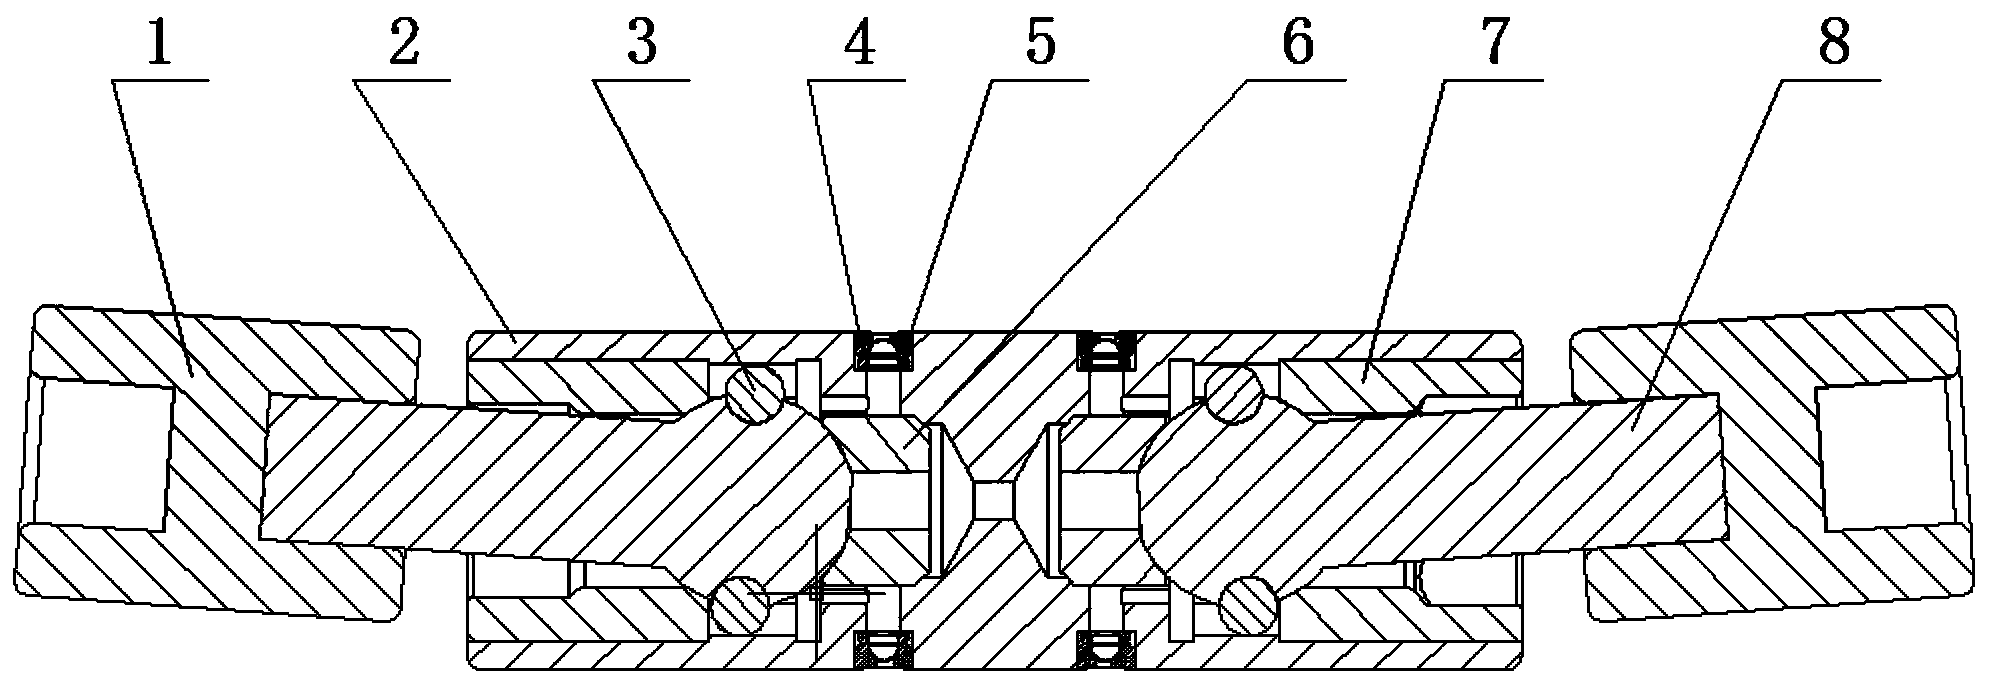 Inclined shaft section sucker rod universal joint type connecting device in ground driven oil recovery screw pump well